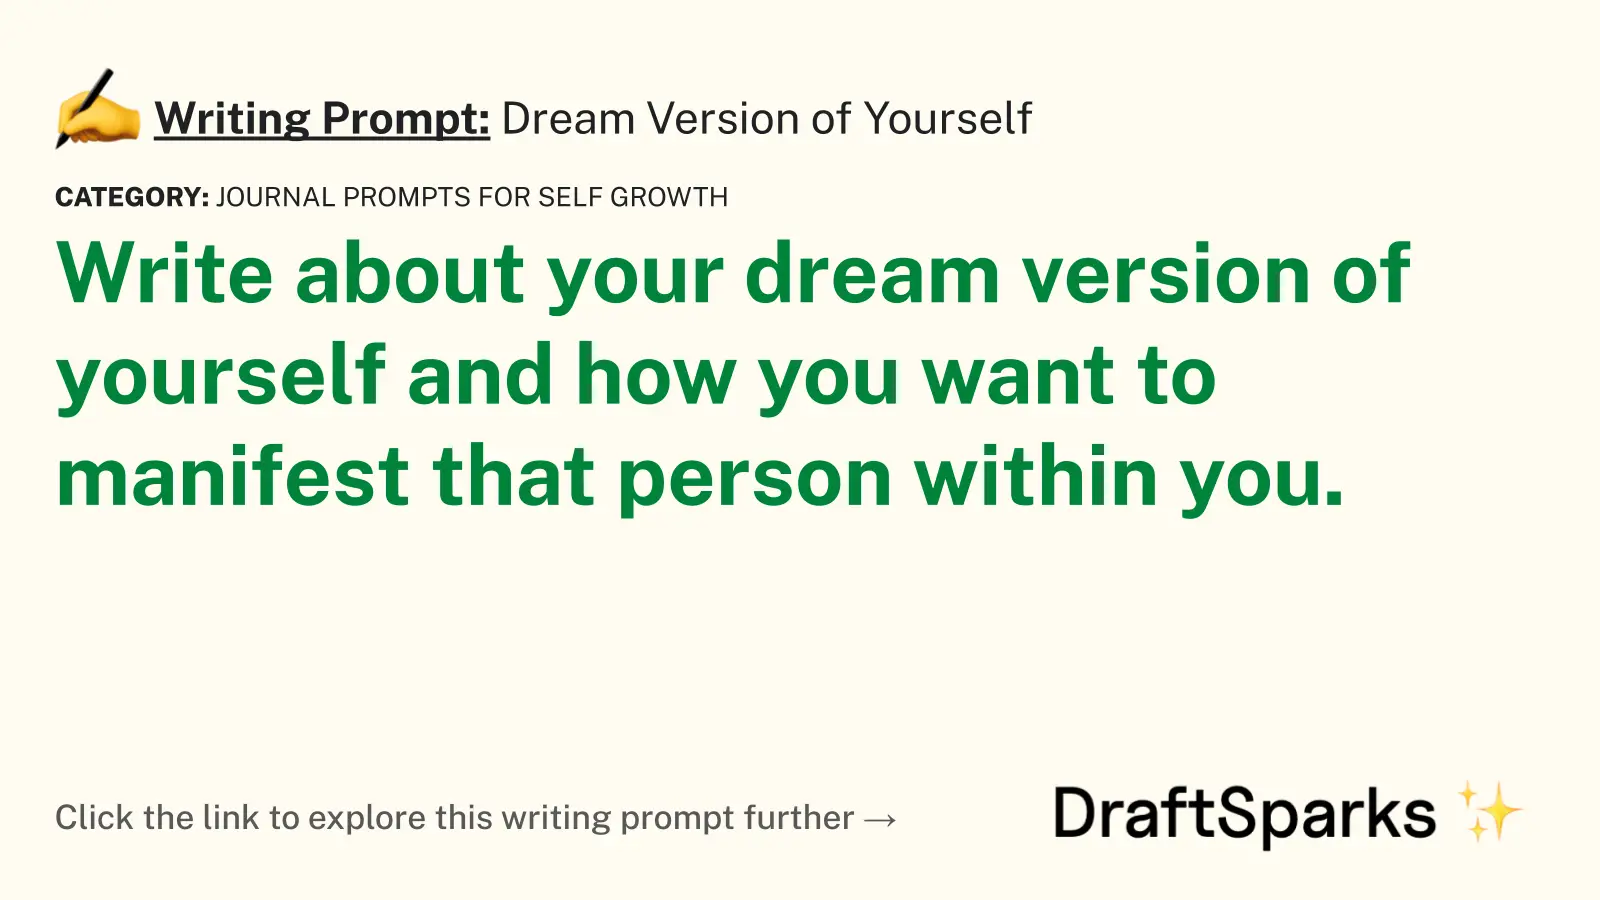 Dream Version of Yourself